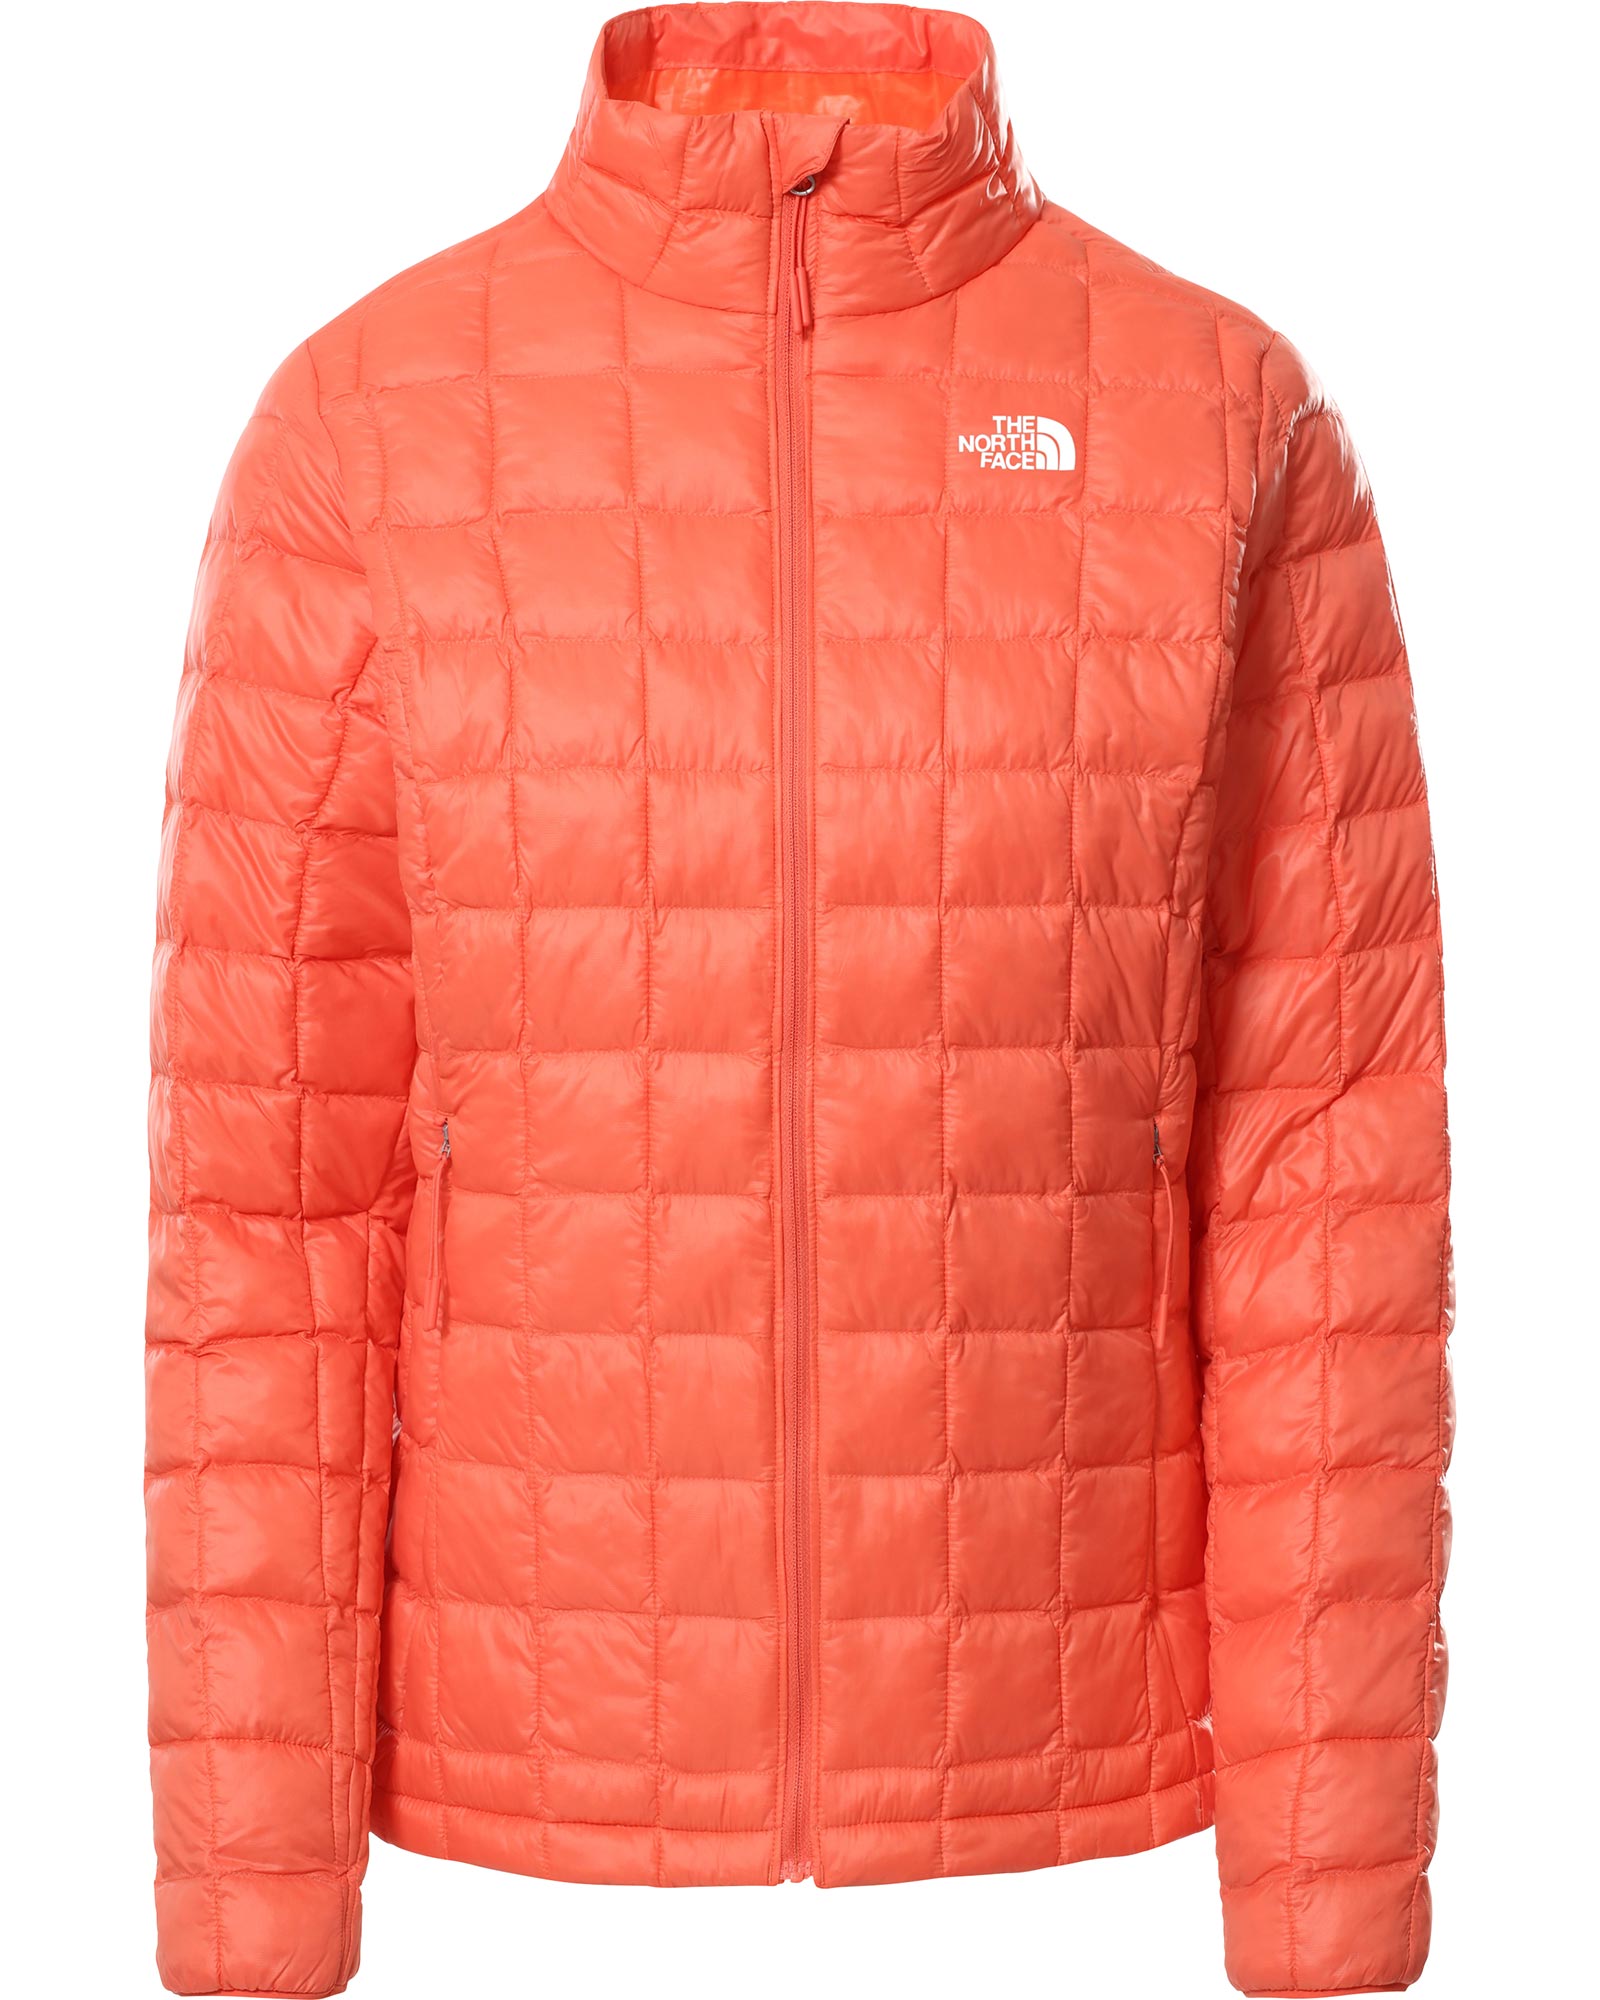 The North Face ThermoBall Eco Women’s Jacket - Emberglow Orange M